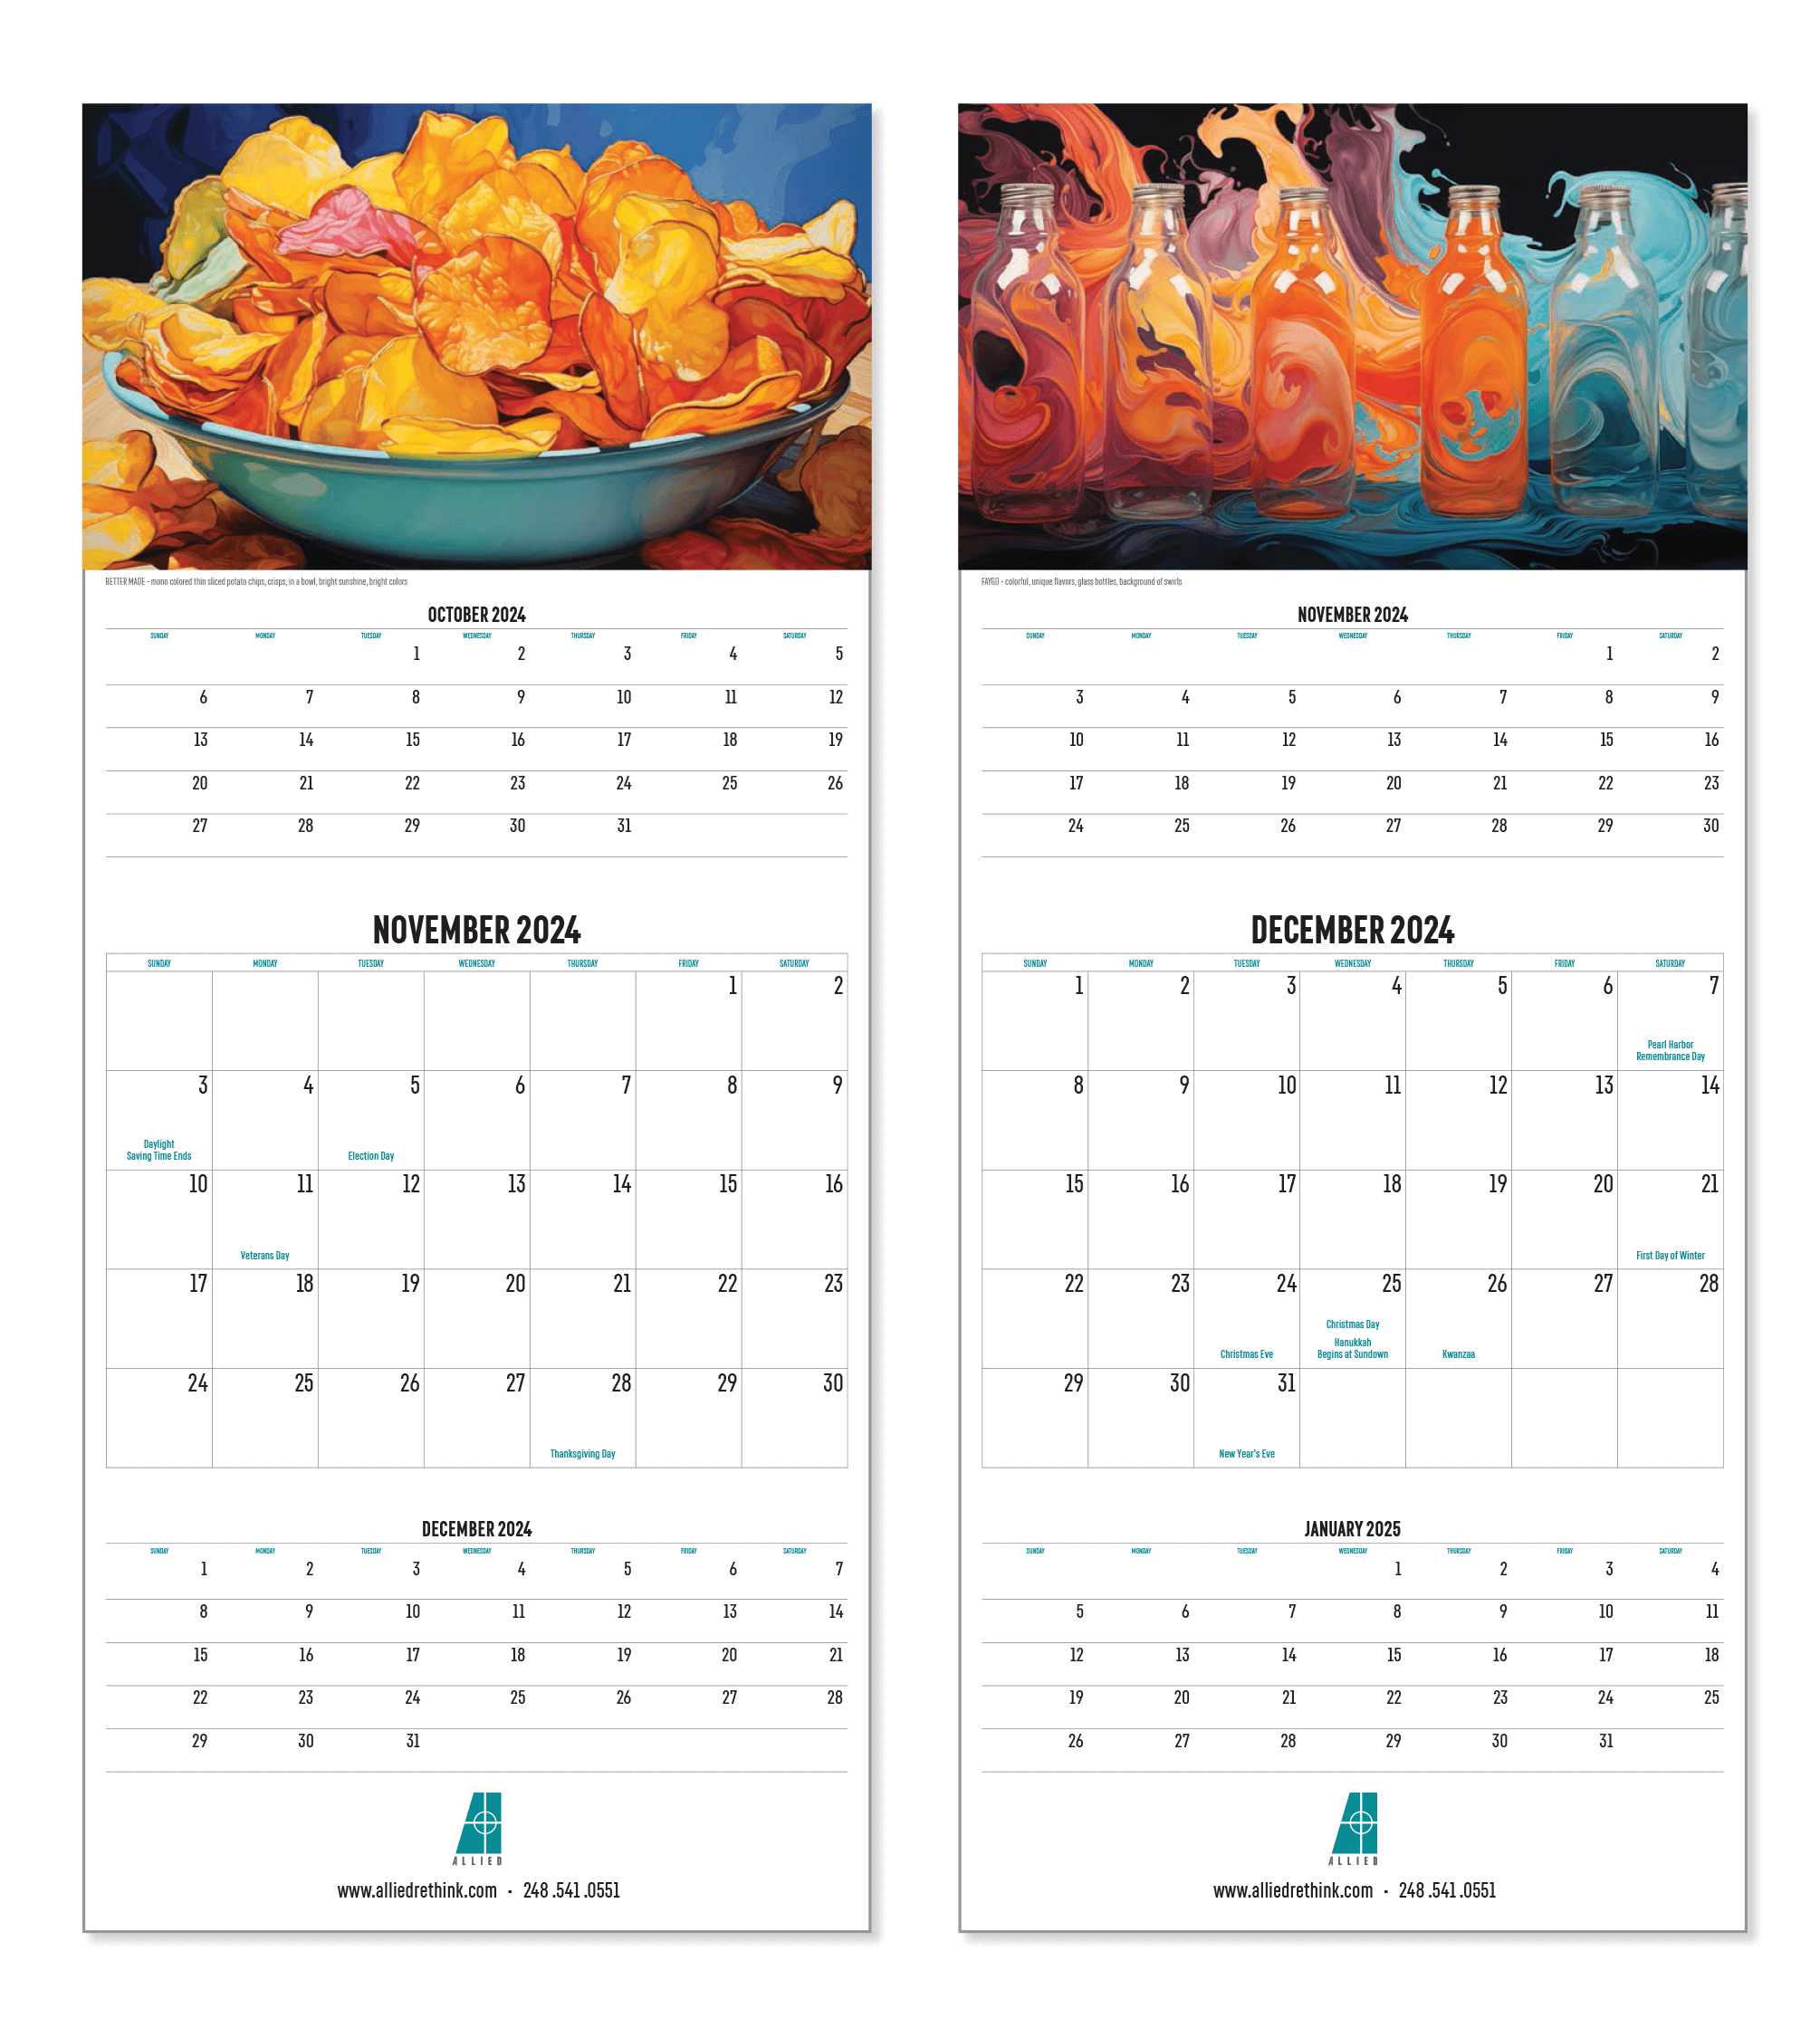 Allied calendar potato chips and soda pop cover image